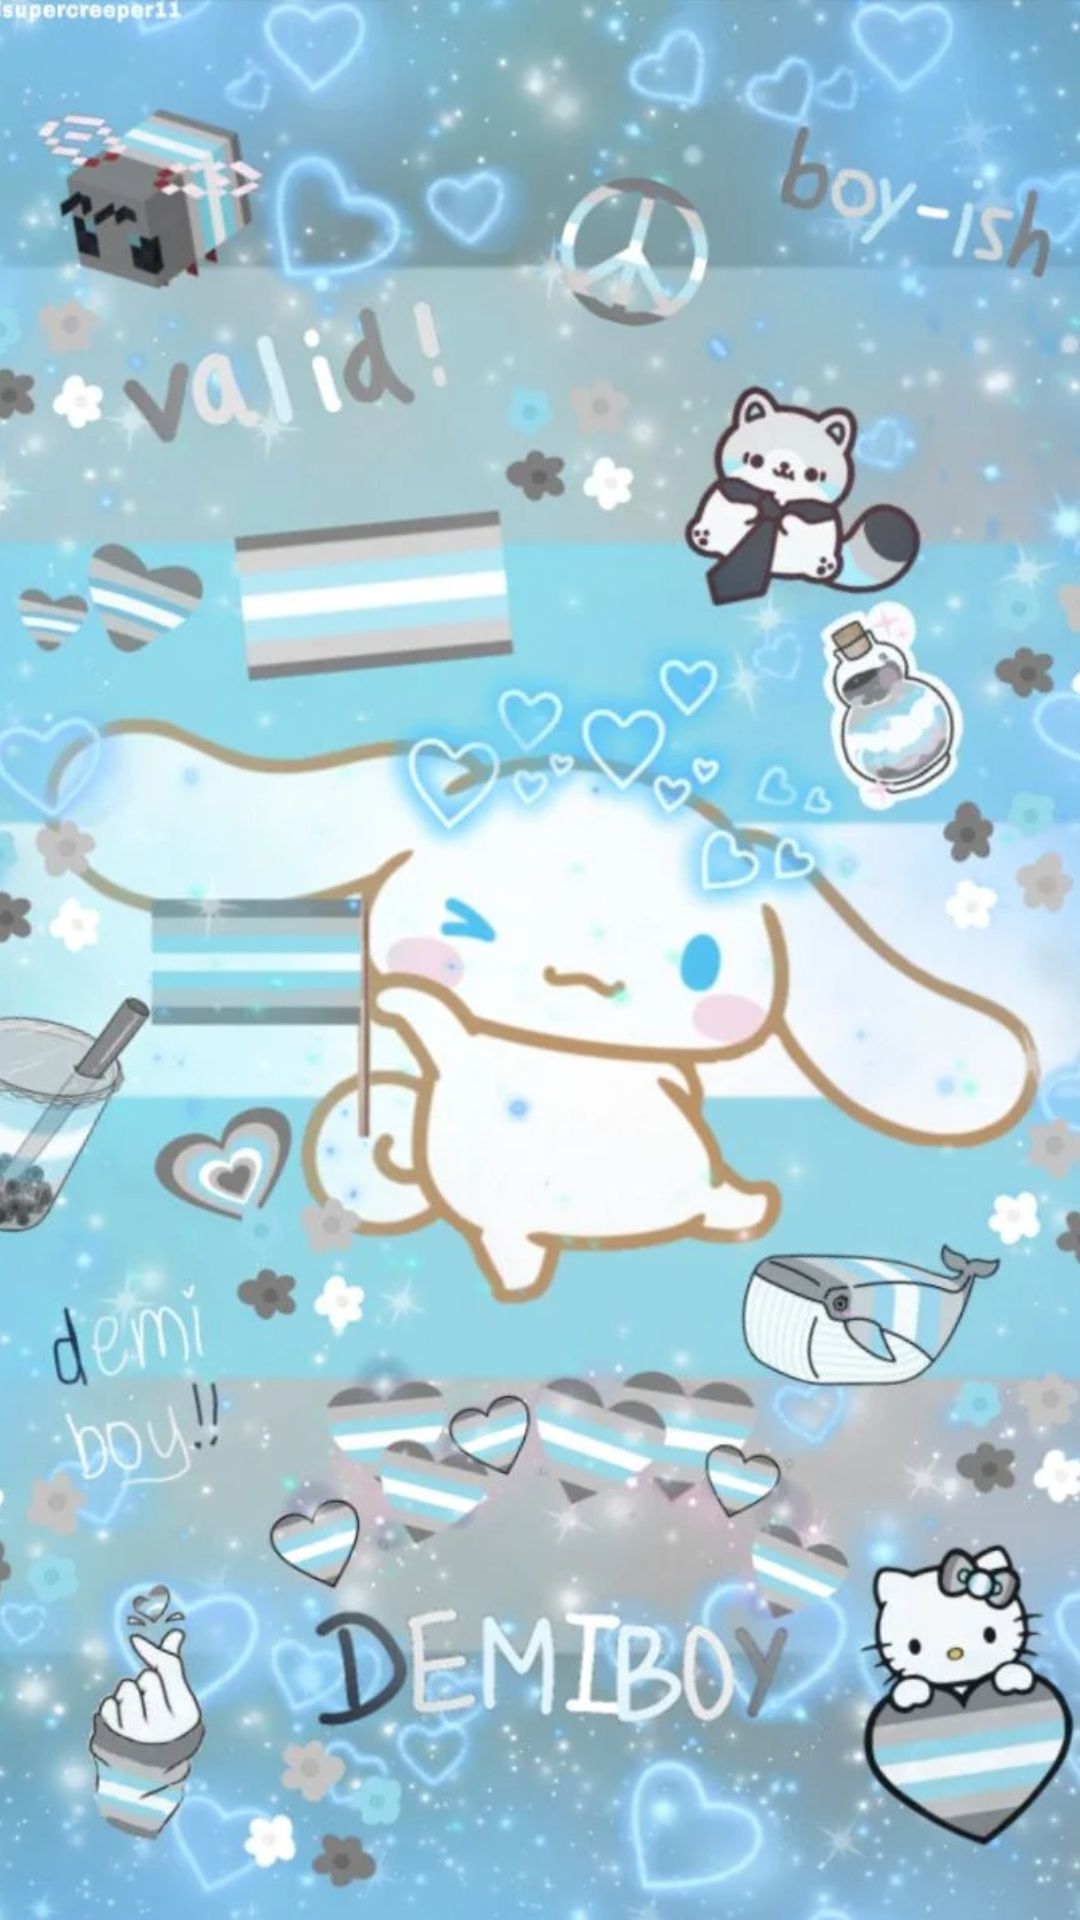 Wallpaper Sanrio Hello Kitty iPhone with image resolution 1080x1920 pixel. You can make this wallpaper for your iPhone 5, 6, 7, 8, X backgrounds, Mobile Screensaver, or iPad Lock Screen - Cinnamoroll